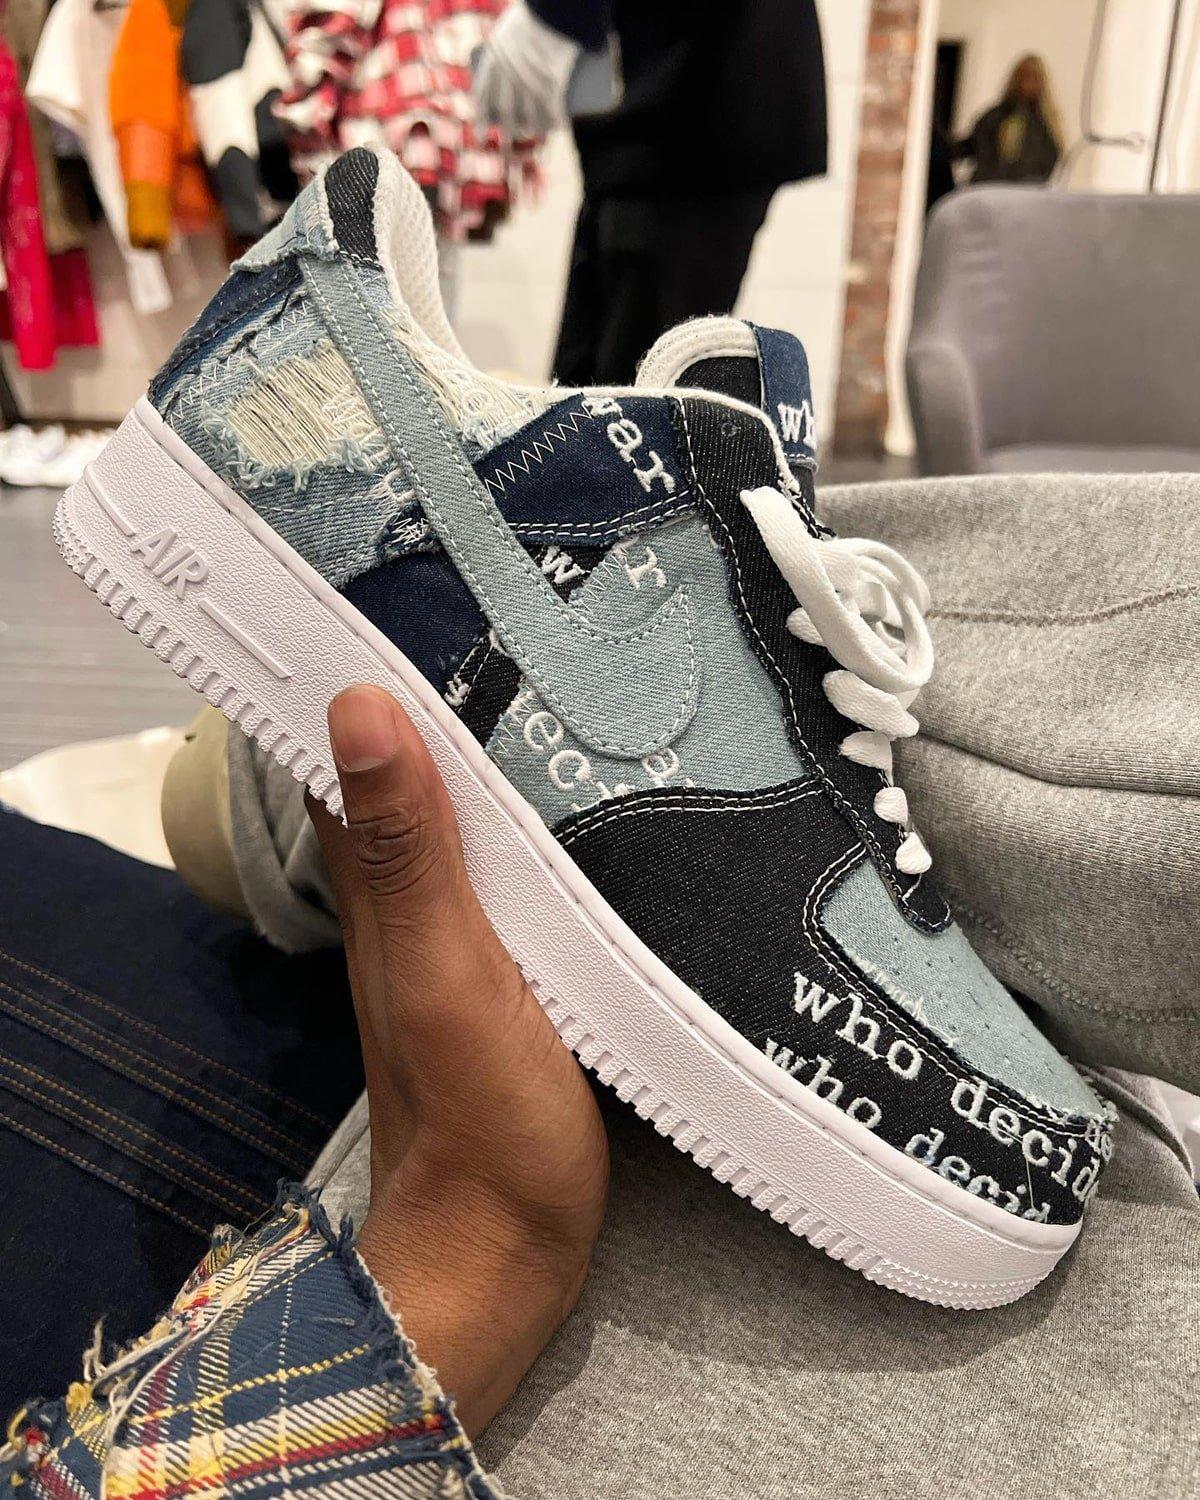 Who Decides War Nike Air Force 1